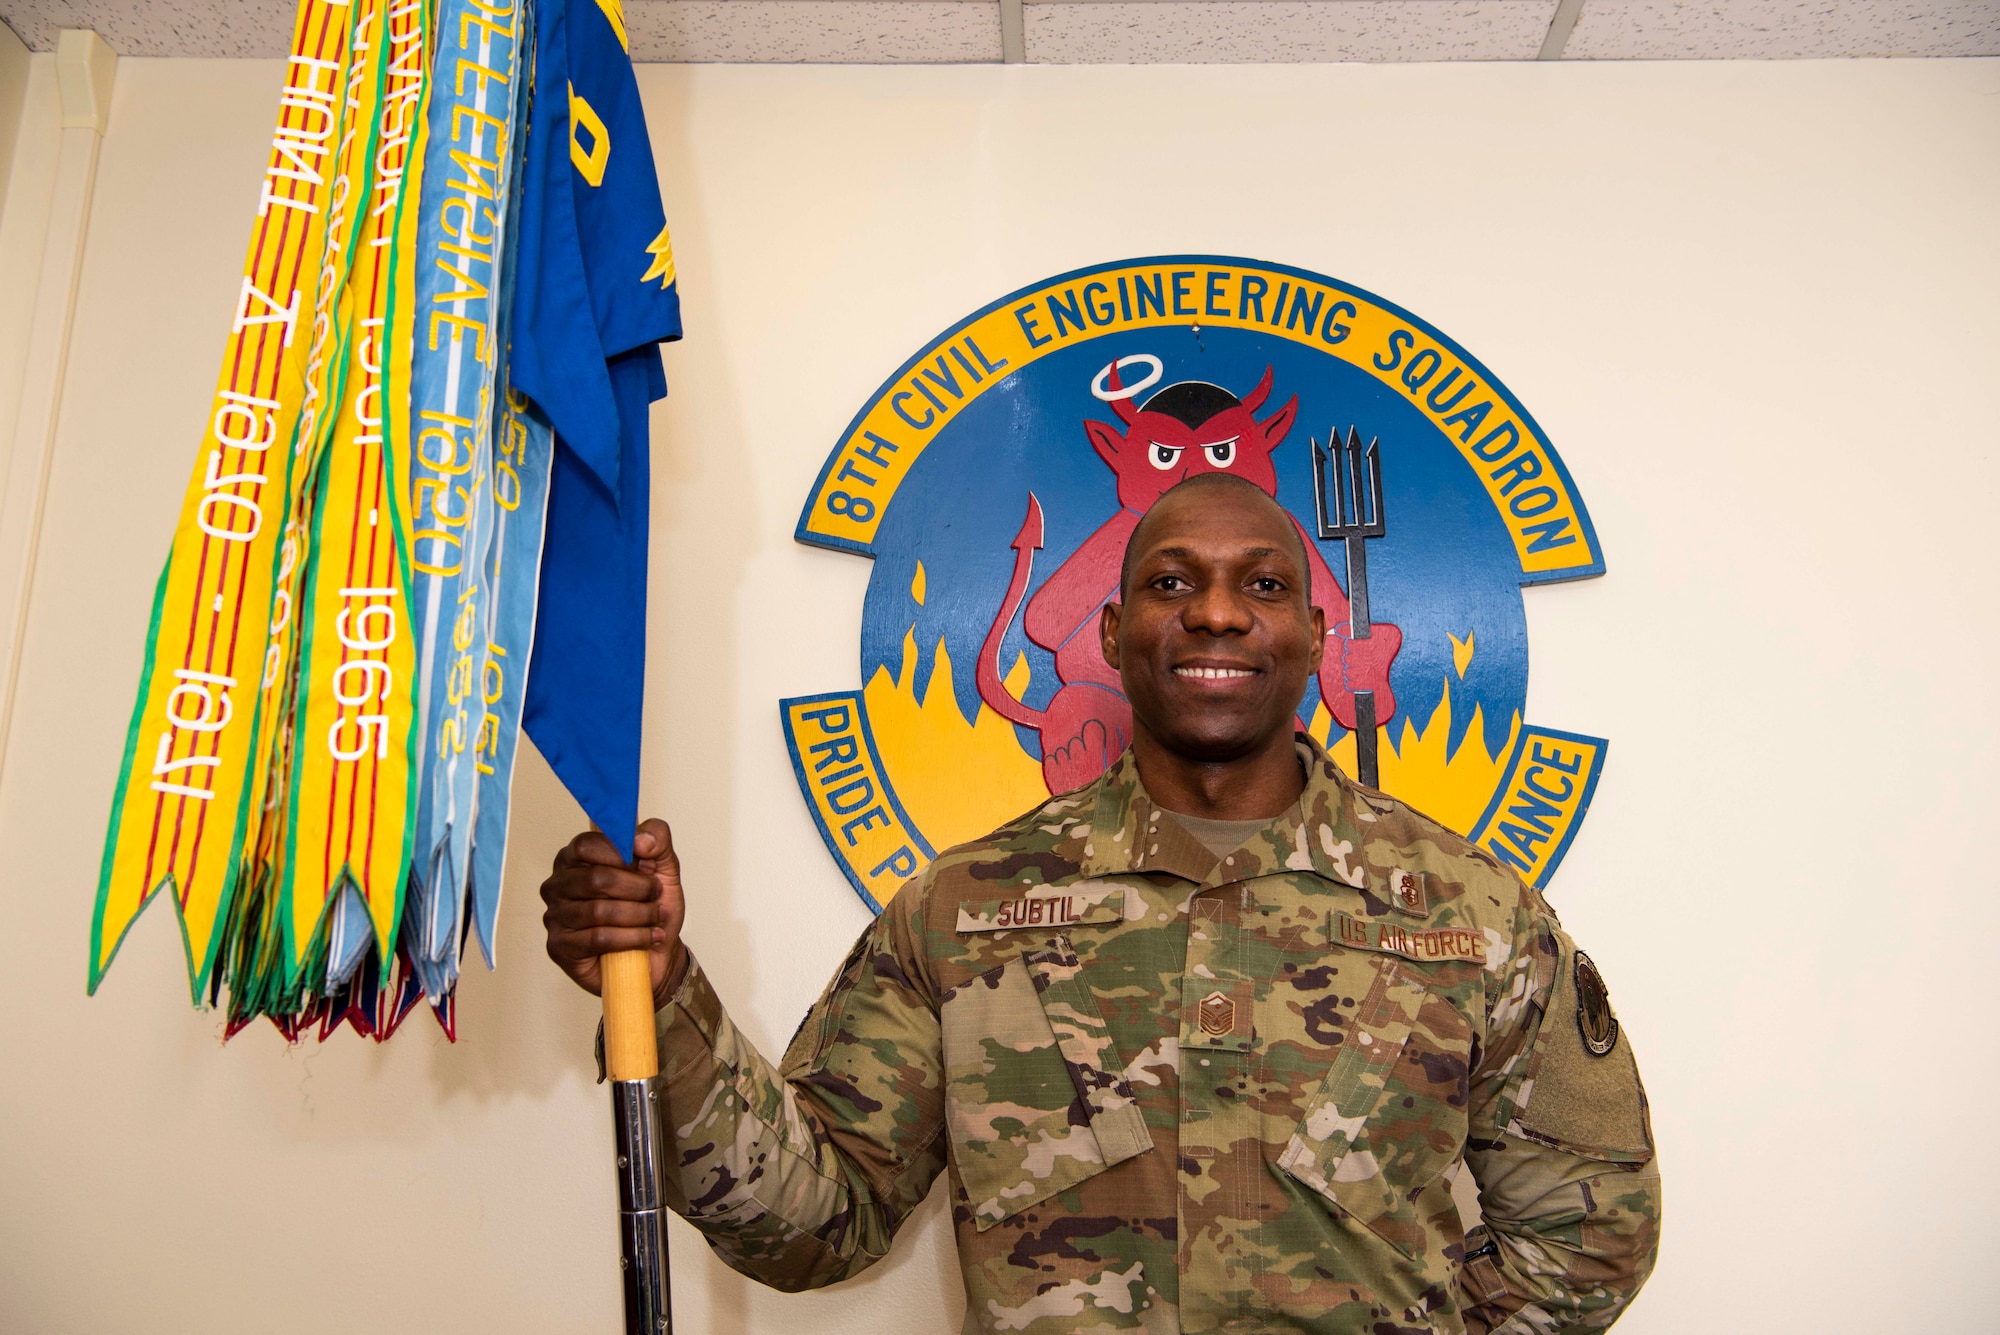 U.S. Air Force Master Sgt. Larwens Subtil, 8th Civil Engineer Squadron first sergeant, poses for a photo in his office at Kunsan Air Base, Republic of Korea, Jan. 11, 2019. Subtil immigrated to the U.S. from Haiti, joined the Air Force, and is currently serving his 15th year in the military. (U.S. Air Force photo by Staff Sgt. Joshua Edwards)